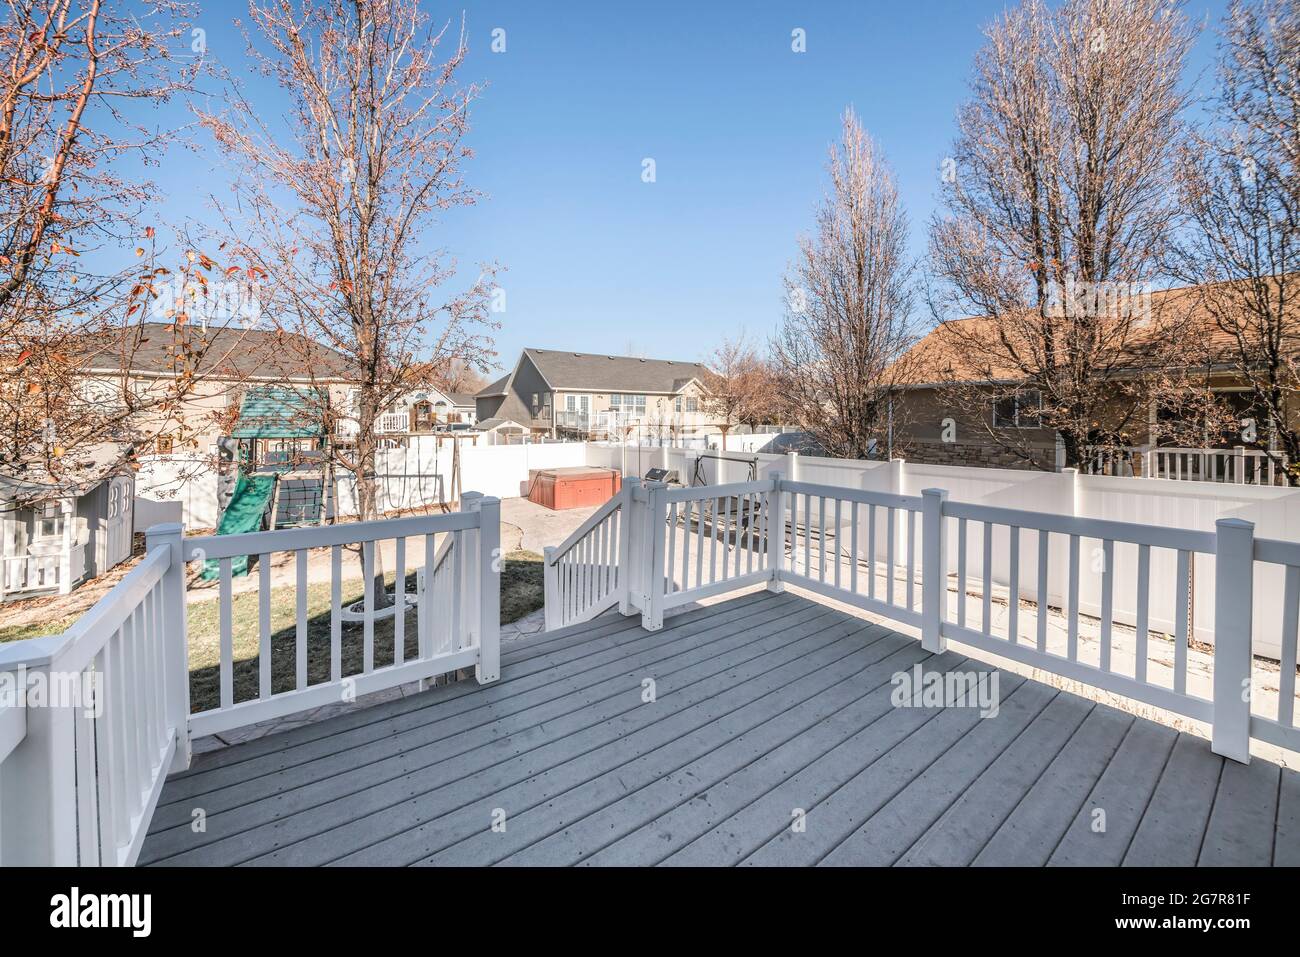 Deck of a house with a view of a playground in the backyard Stock Photo